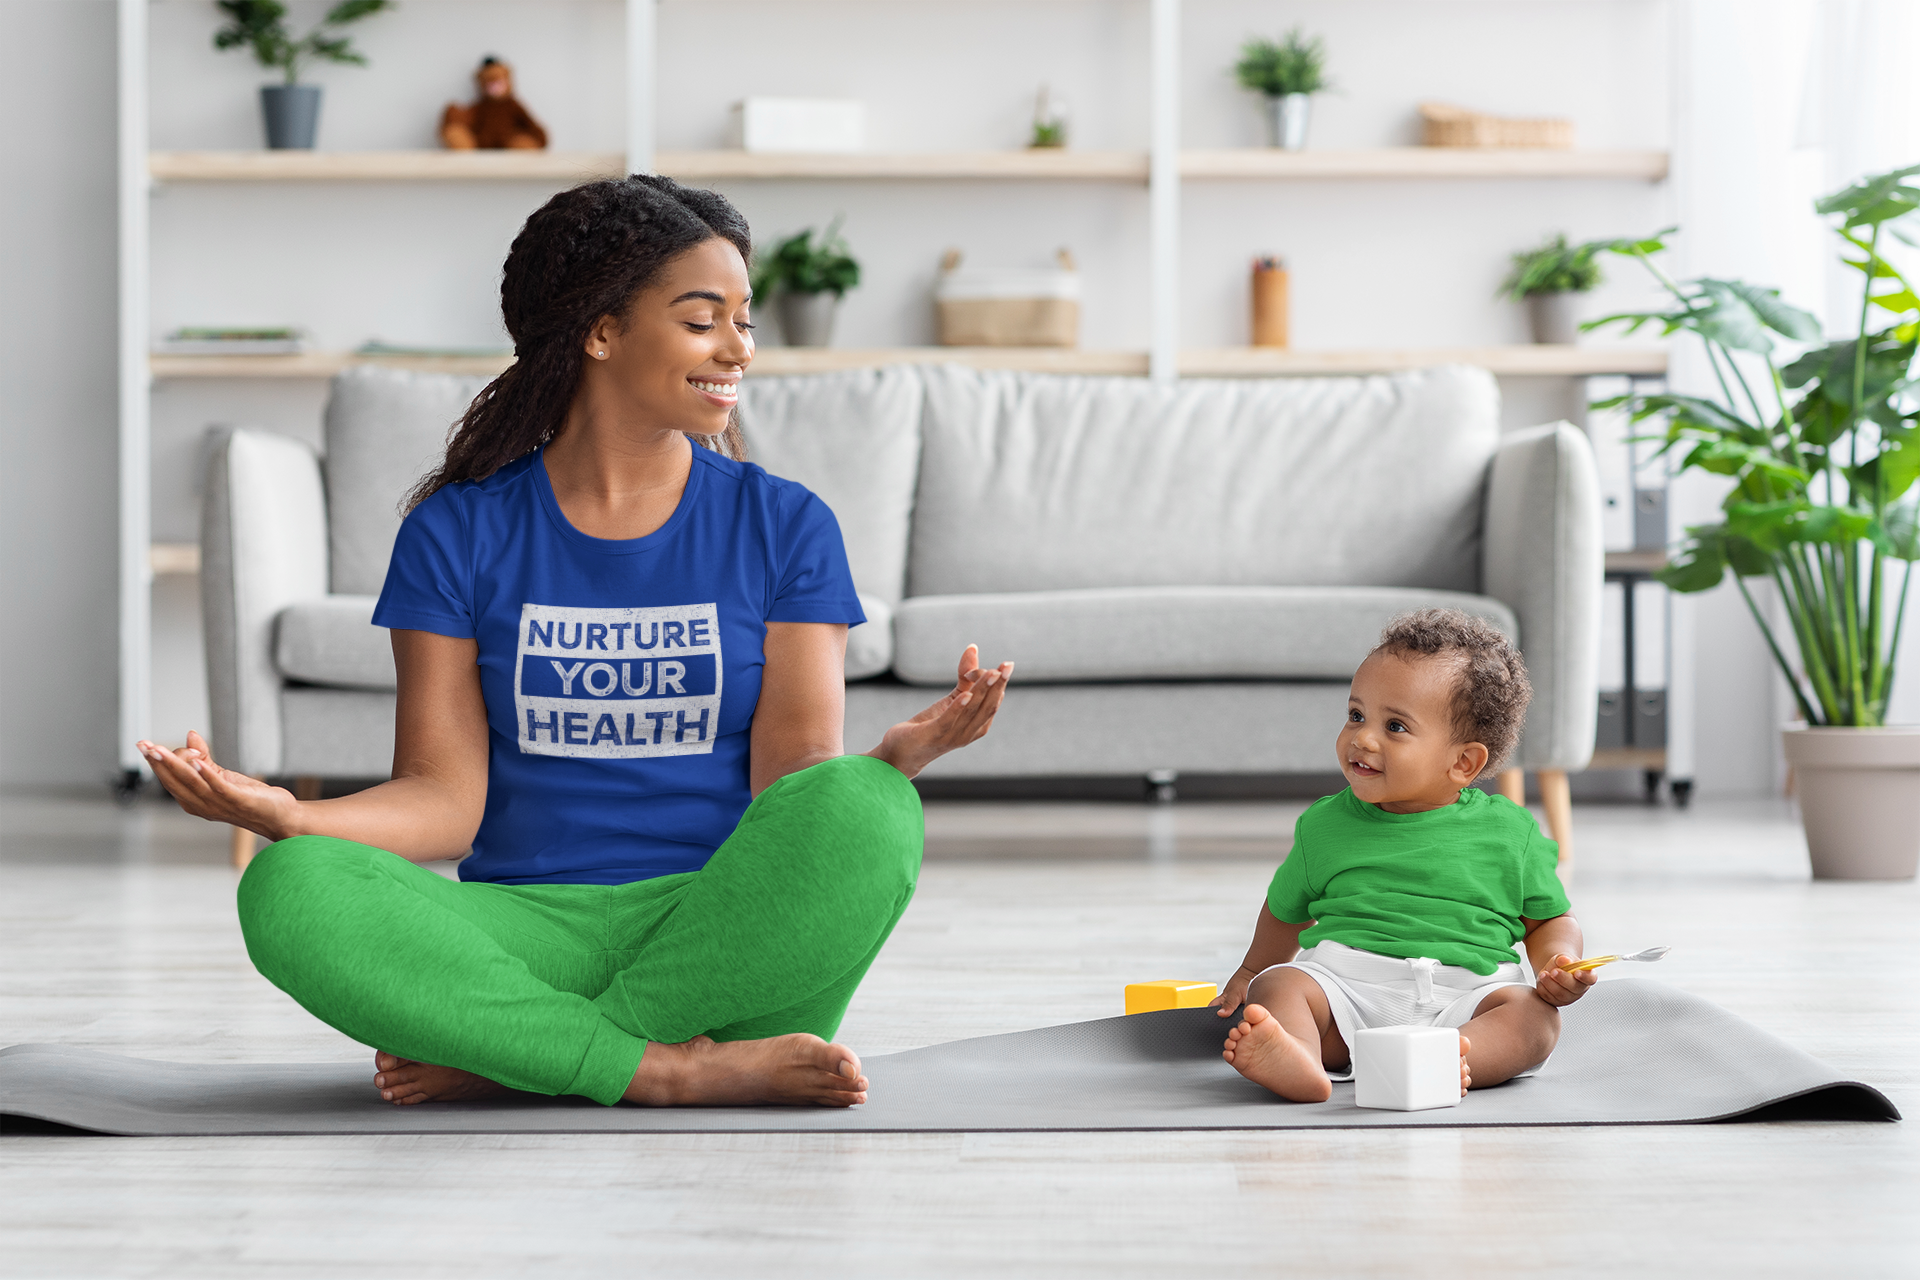 mockup-of-a-woman-wearing-a-t-shirt-and-meditating-with-her-baby-at-home-m21564-r-el2.png